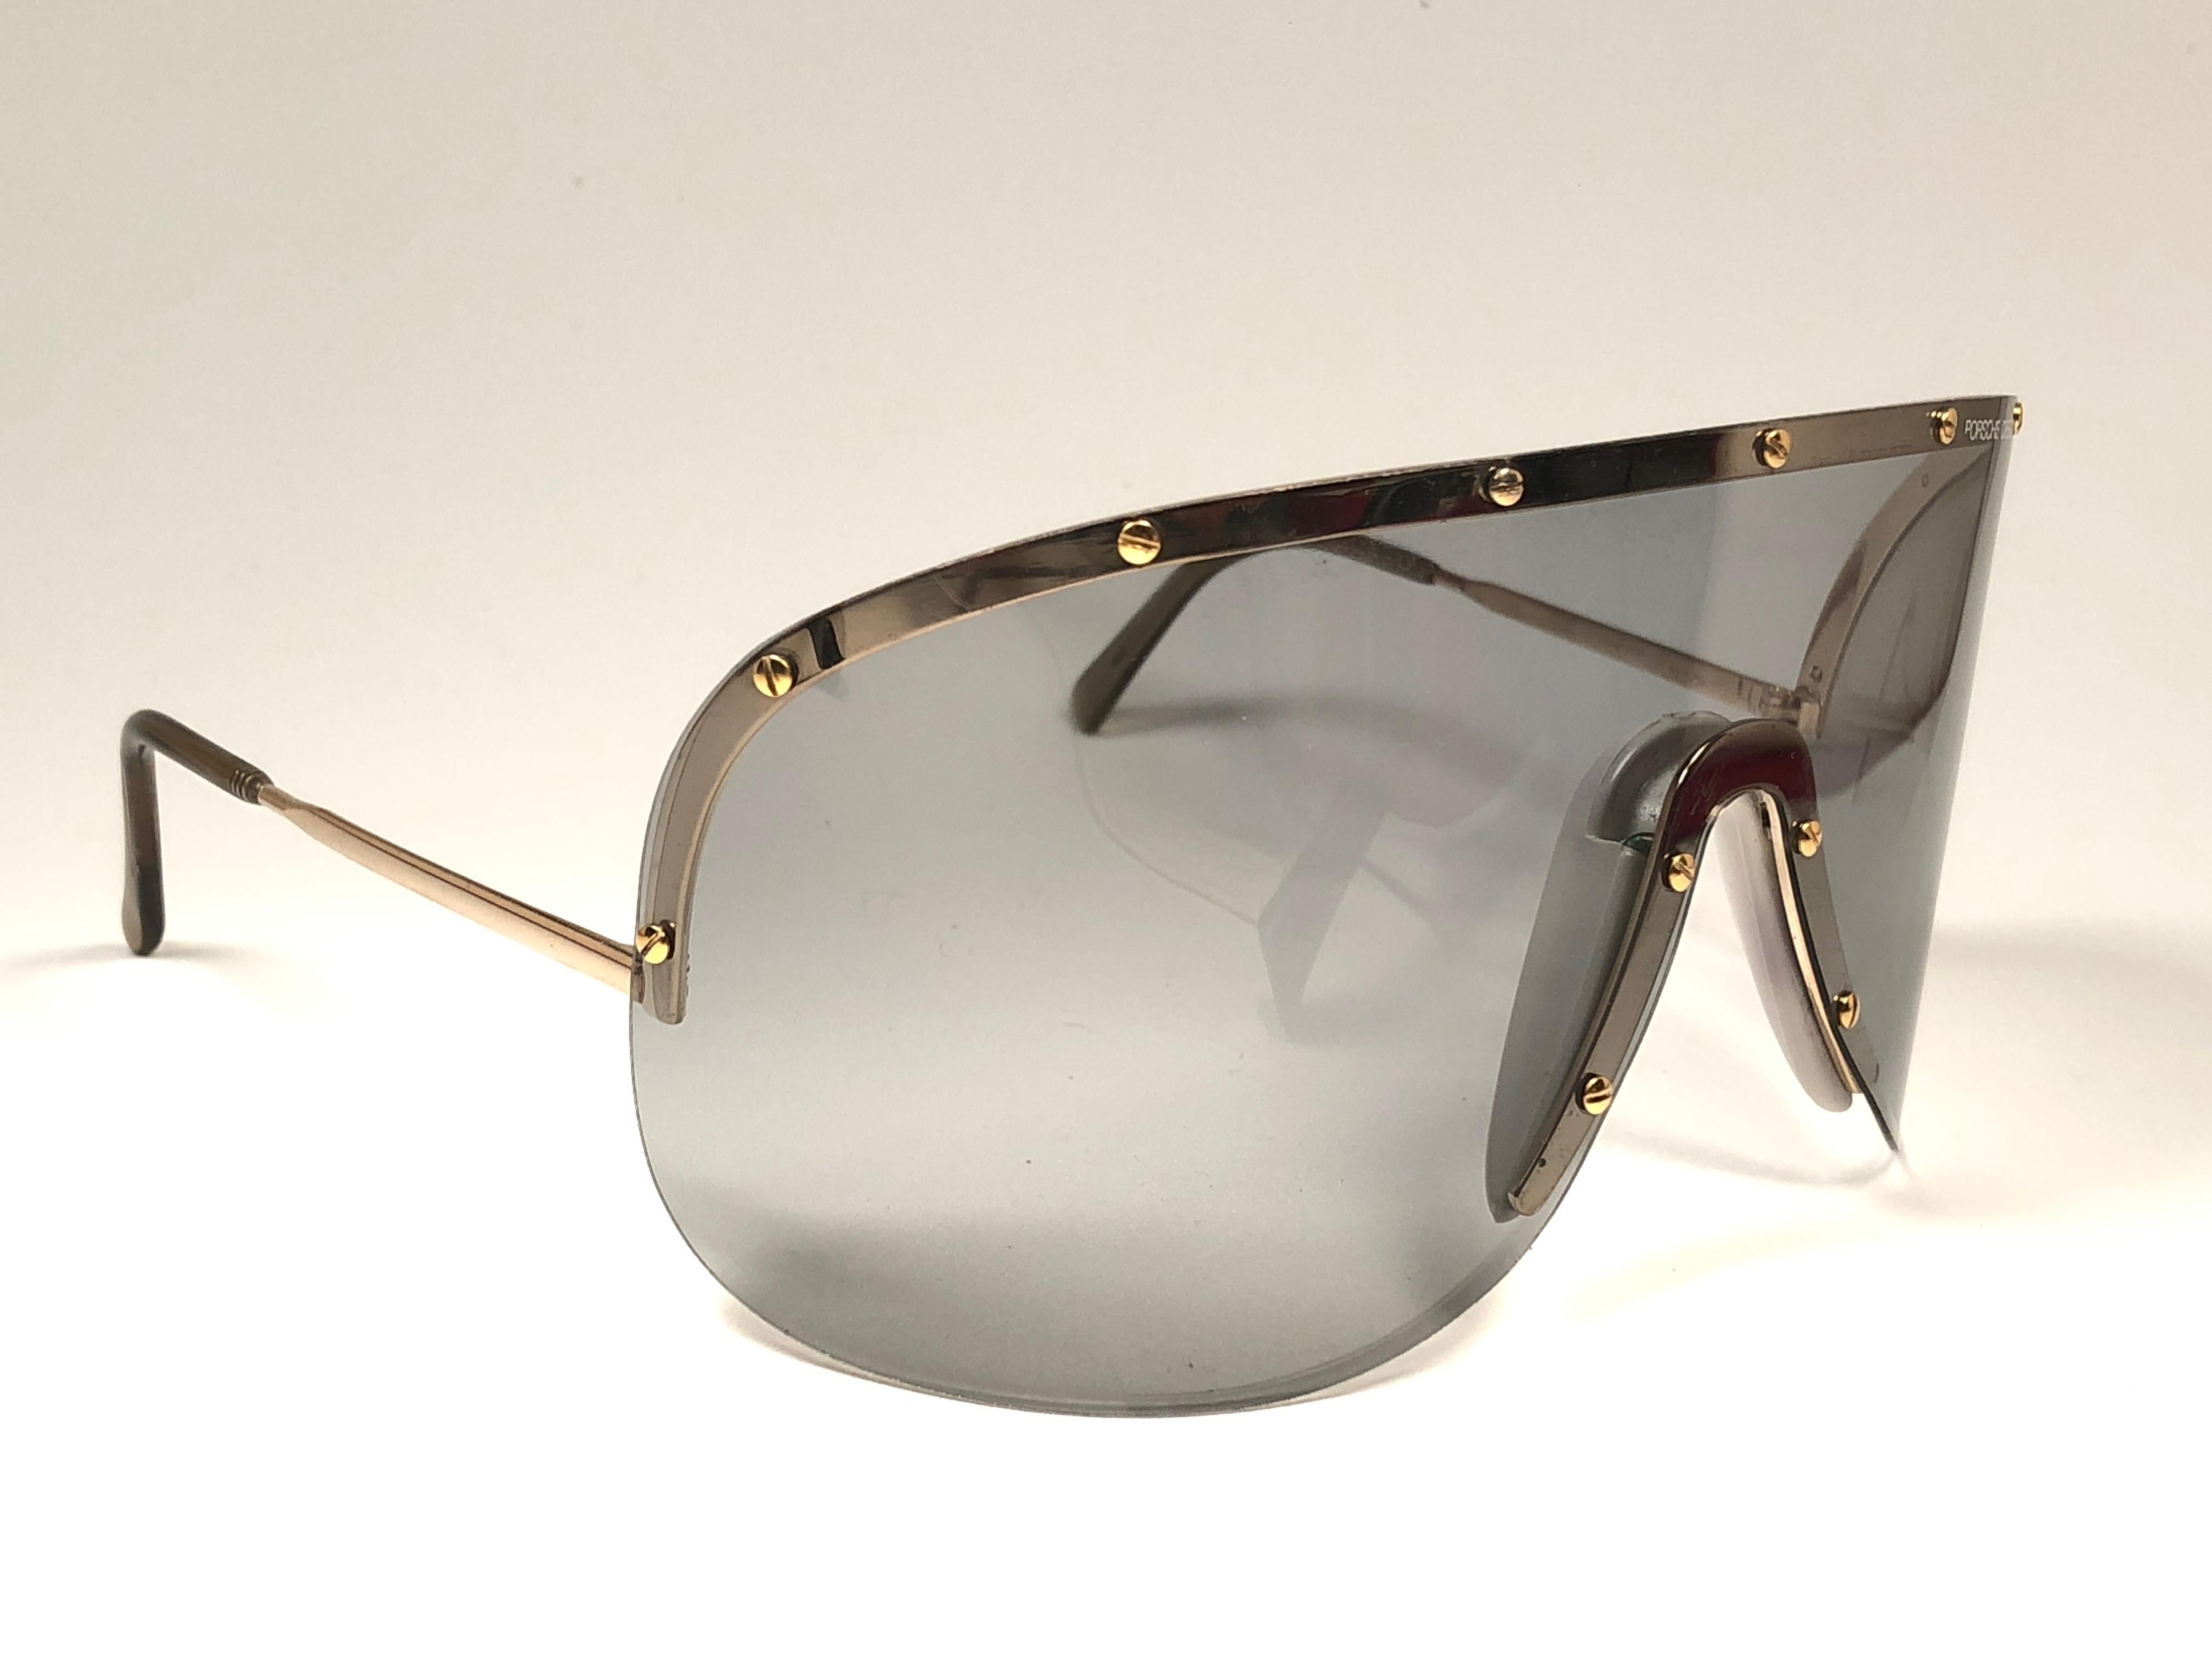 Ultra rare collectors item from the 1980's, 30 years old Porsche Design 5620 gold and grey shield frame with medium grey mono lens. This frame has been gently worn and have minor sign of wear on the mono lens in the shape of minor hairlike